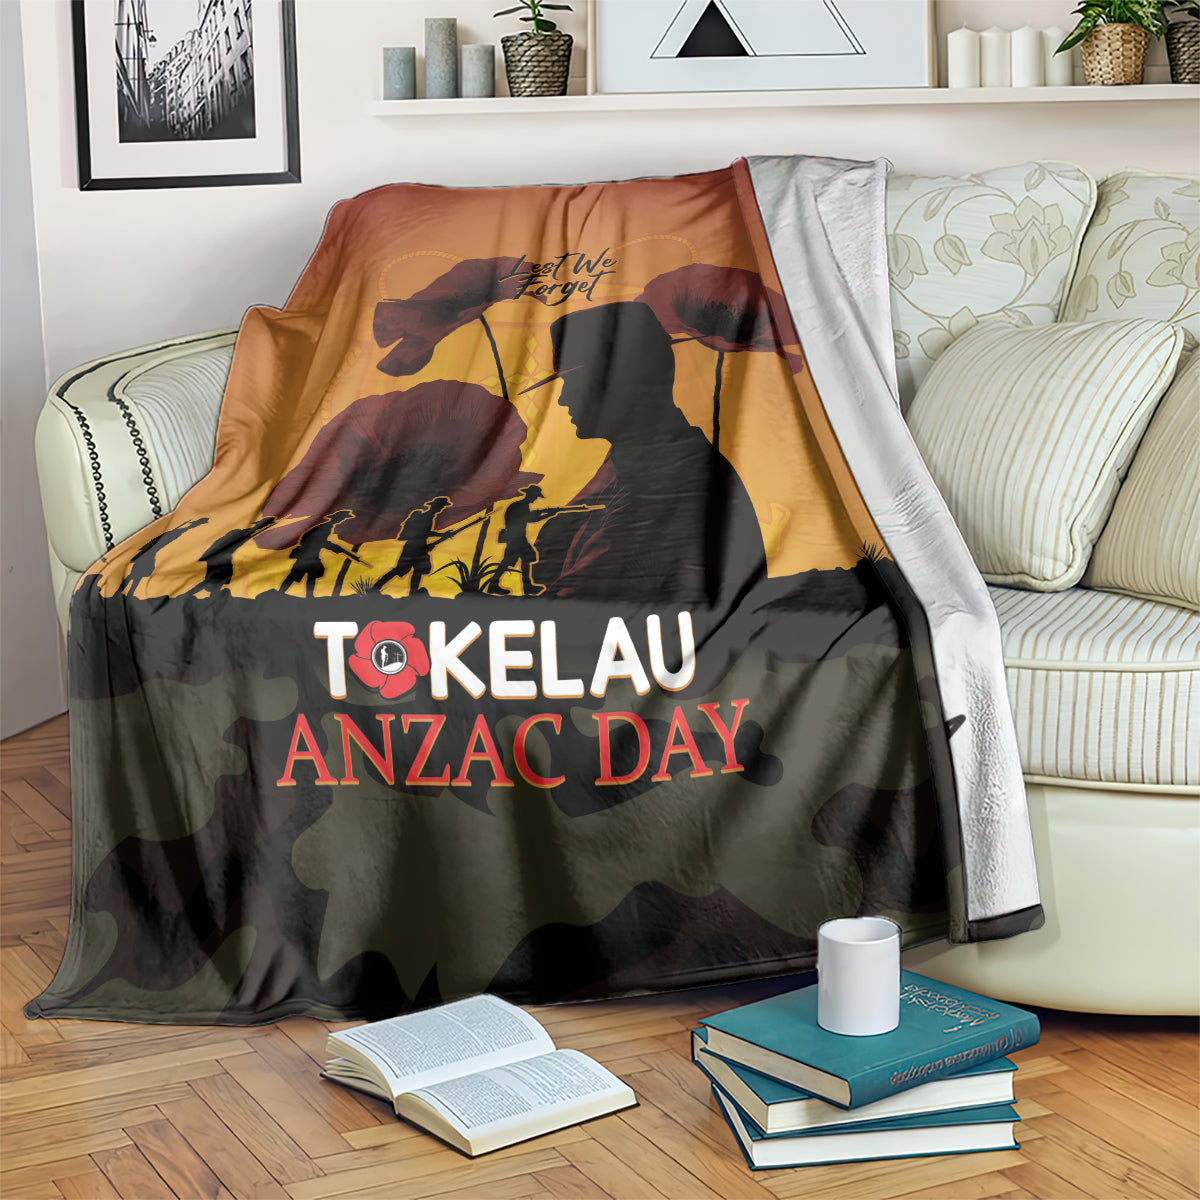 Tokelau ANZAC Day Blanket Camouflage With Poppies Lest We Forget LT14 Yellow - Polynesian Pride